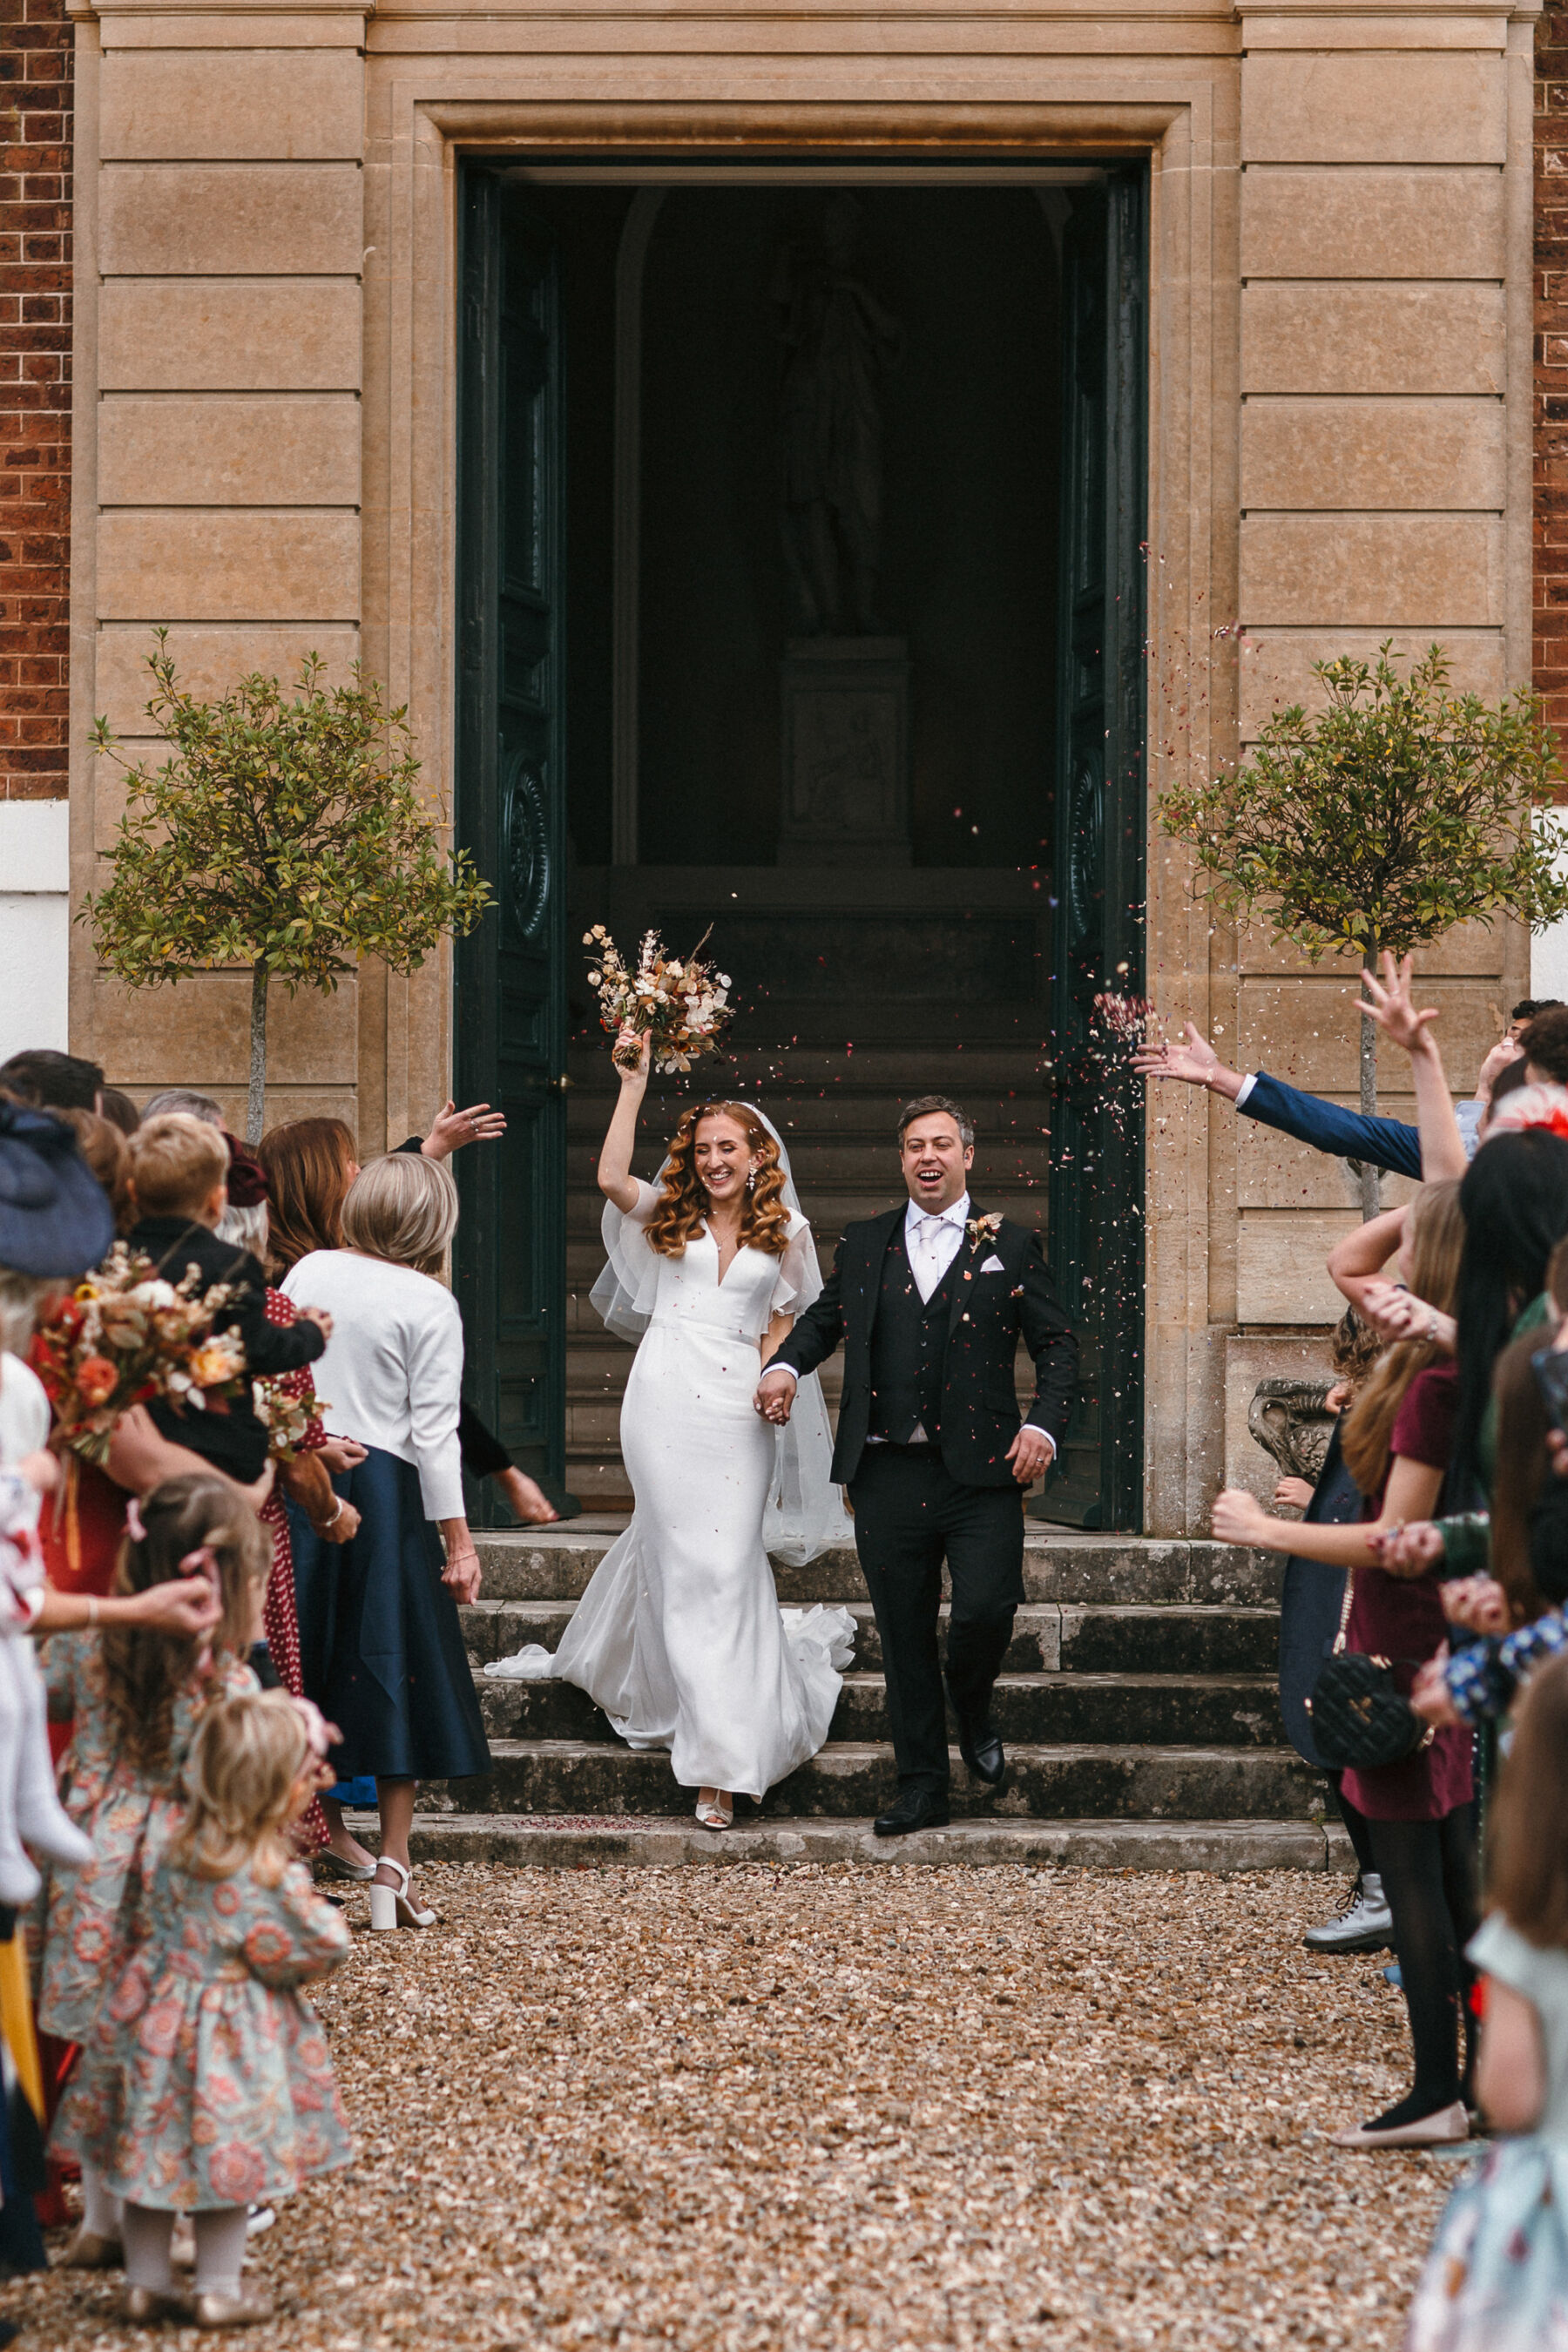 Bride and groom exiting their wedding ceremony to a shower of confetti at Pynes House in Devon. The bride wears Suzanne Neville and has long red wavy hair - she holds her bouquet up in the sky in celebration. Her groom wears a dark three piece suit.